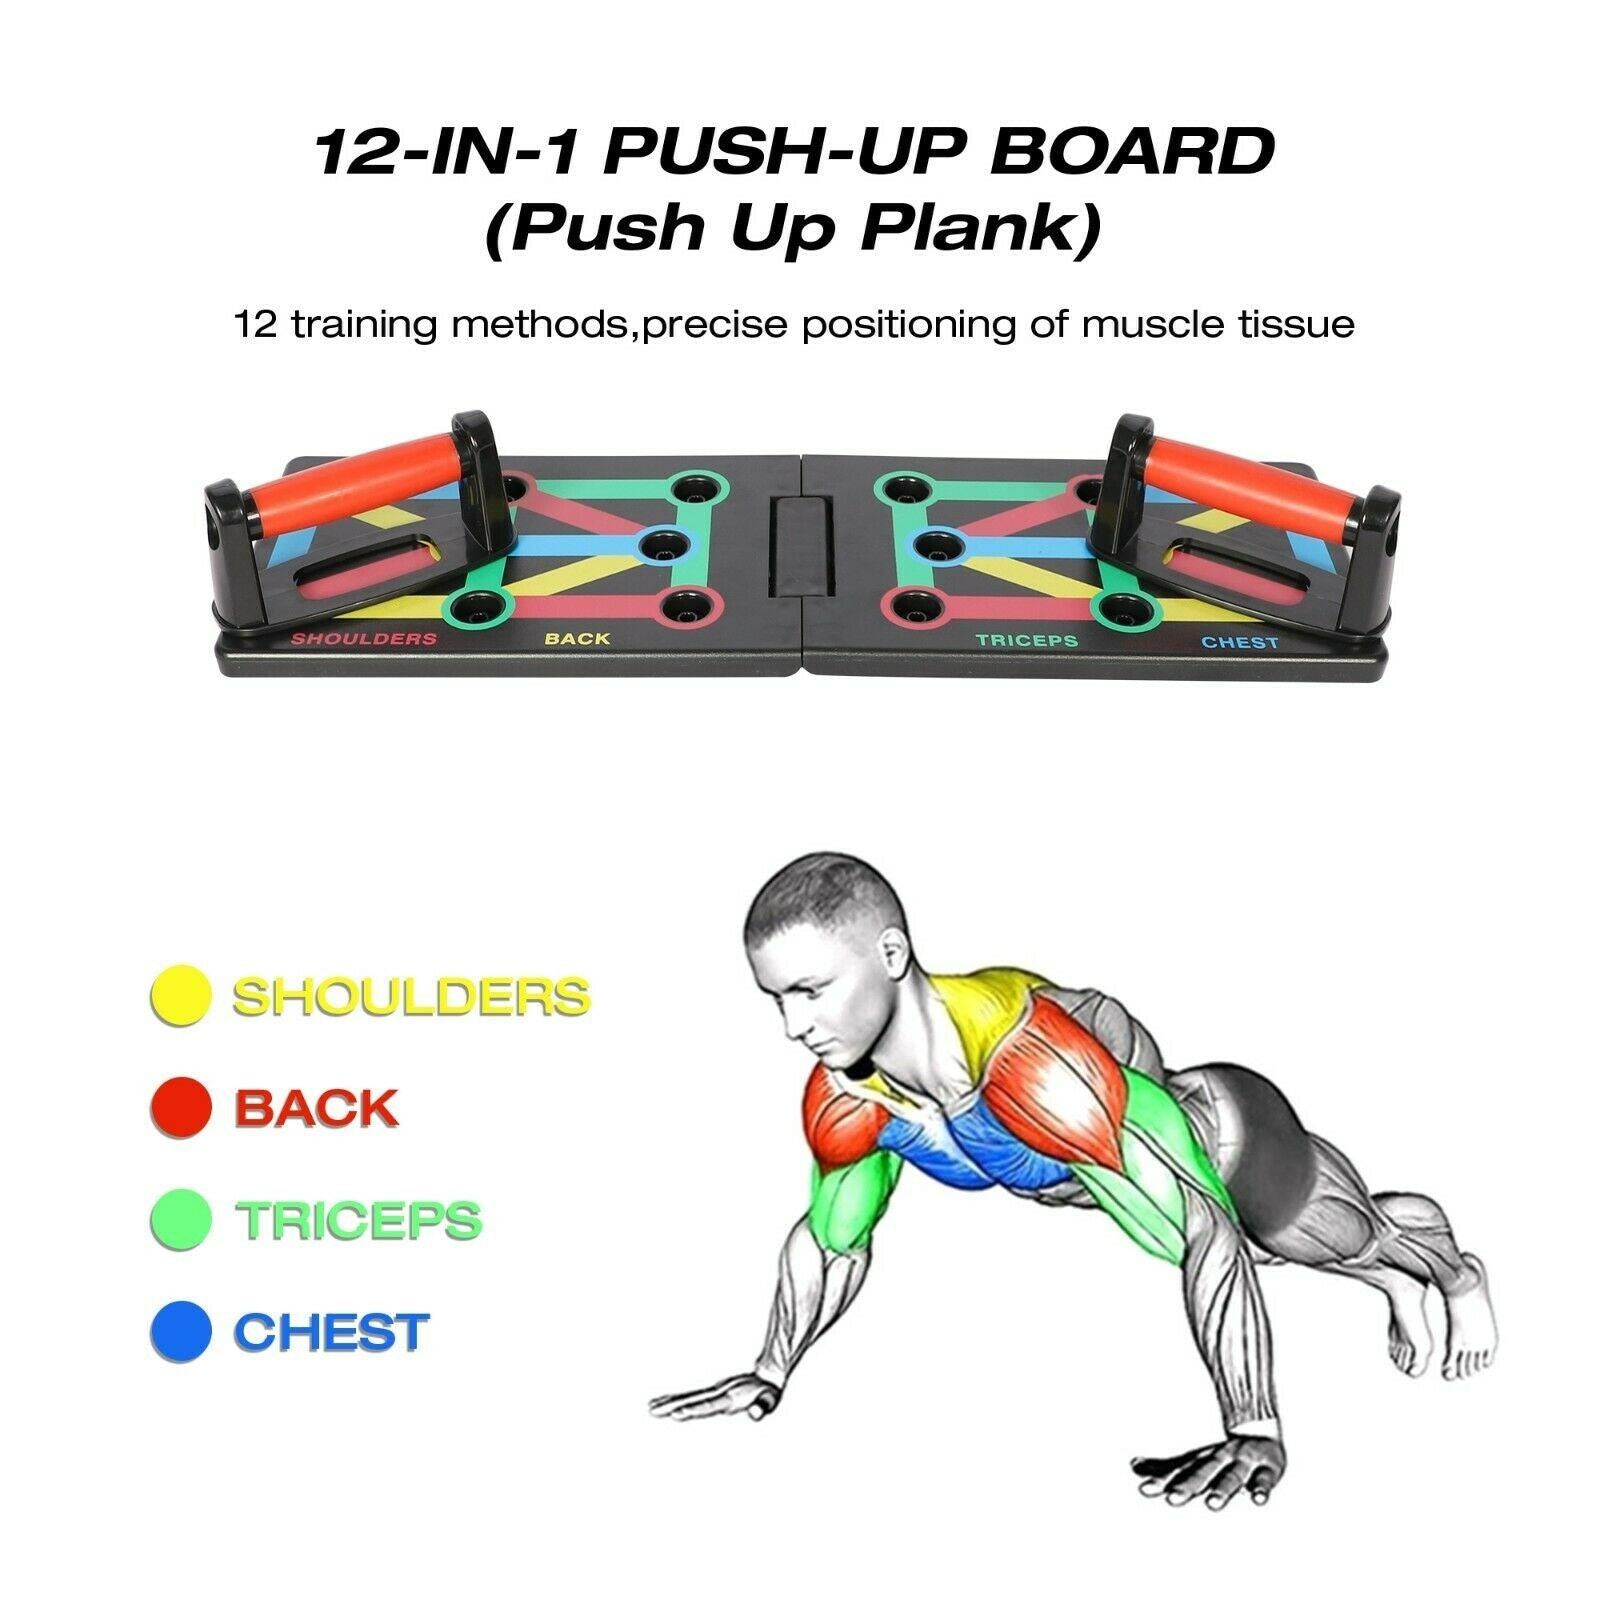 Portable 12-IN-1 Fold Push Up Rack Board Exercise Tool - Bosonshop